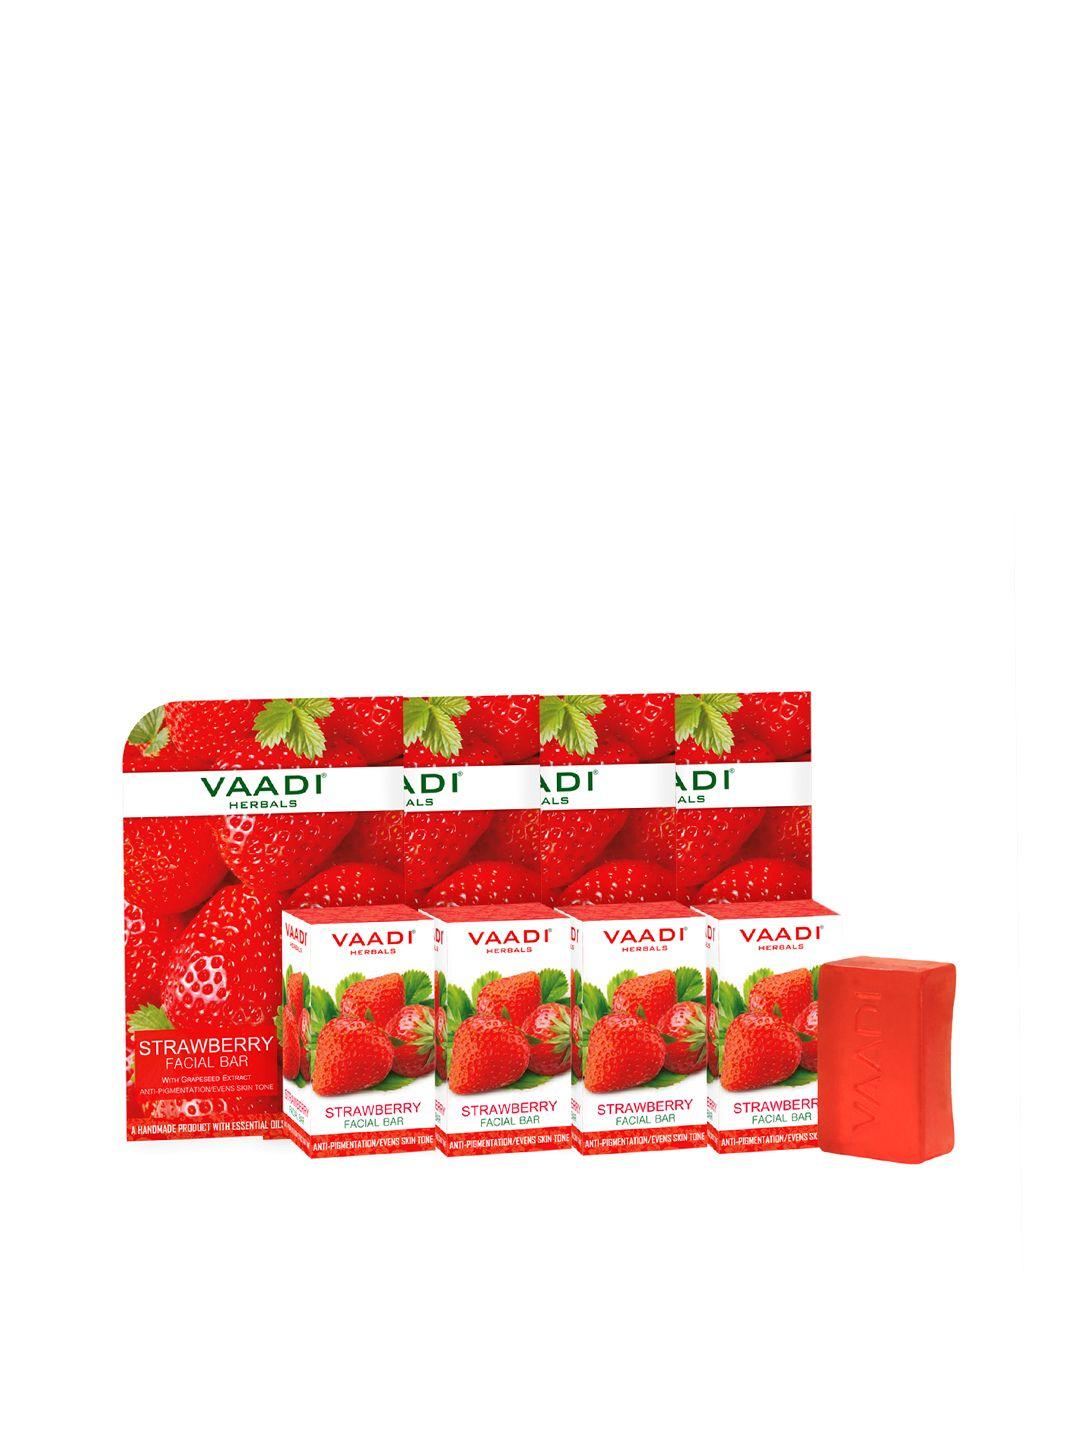 vaadi herbals set of 4 strawberry facial bars with grapeseed extract - 25g each